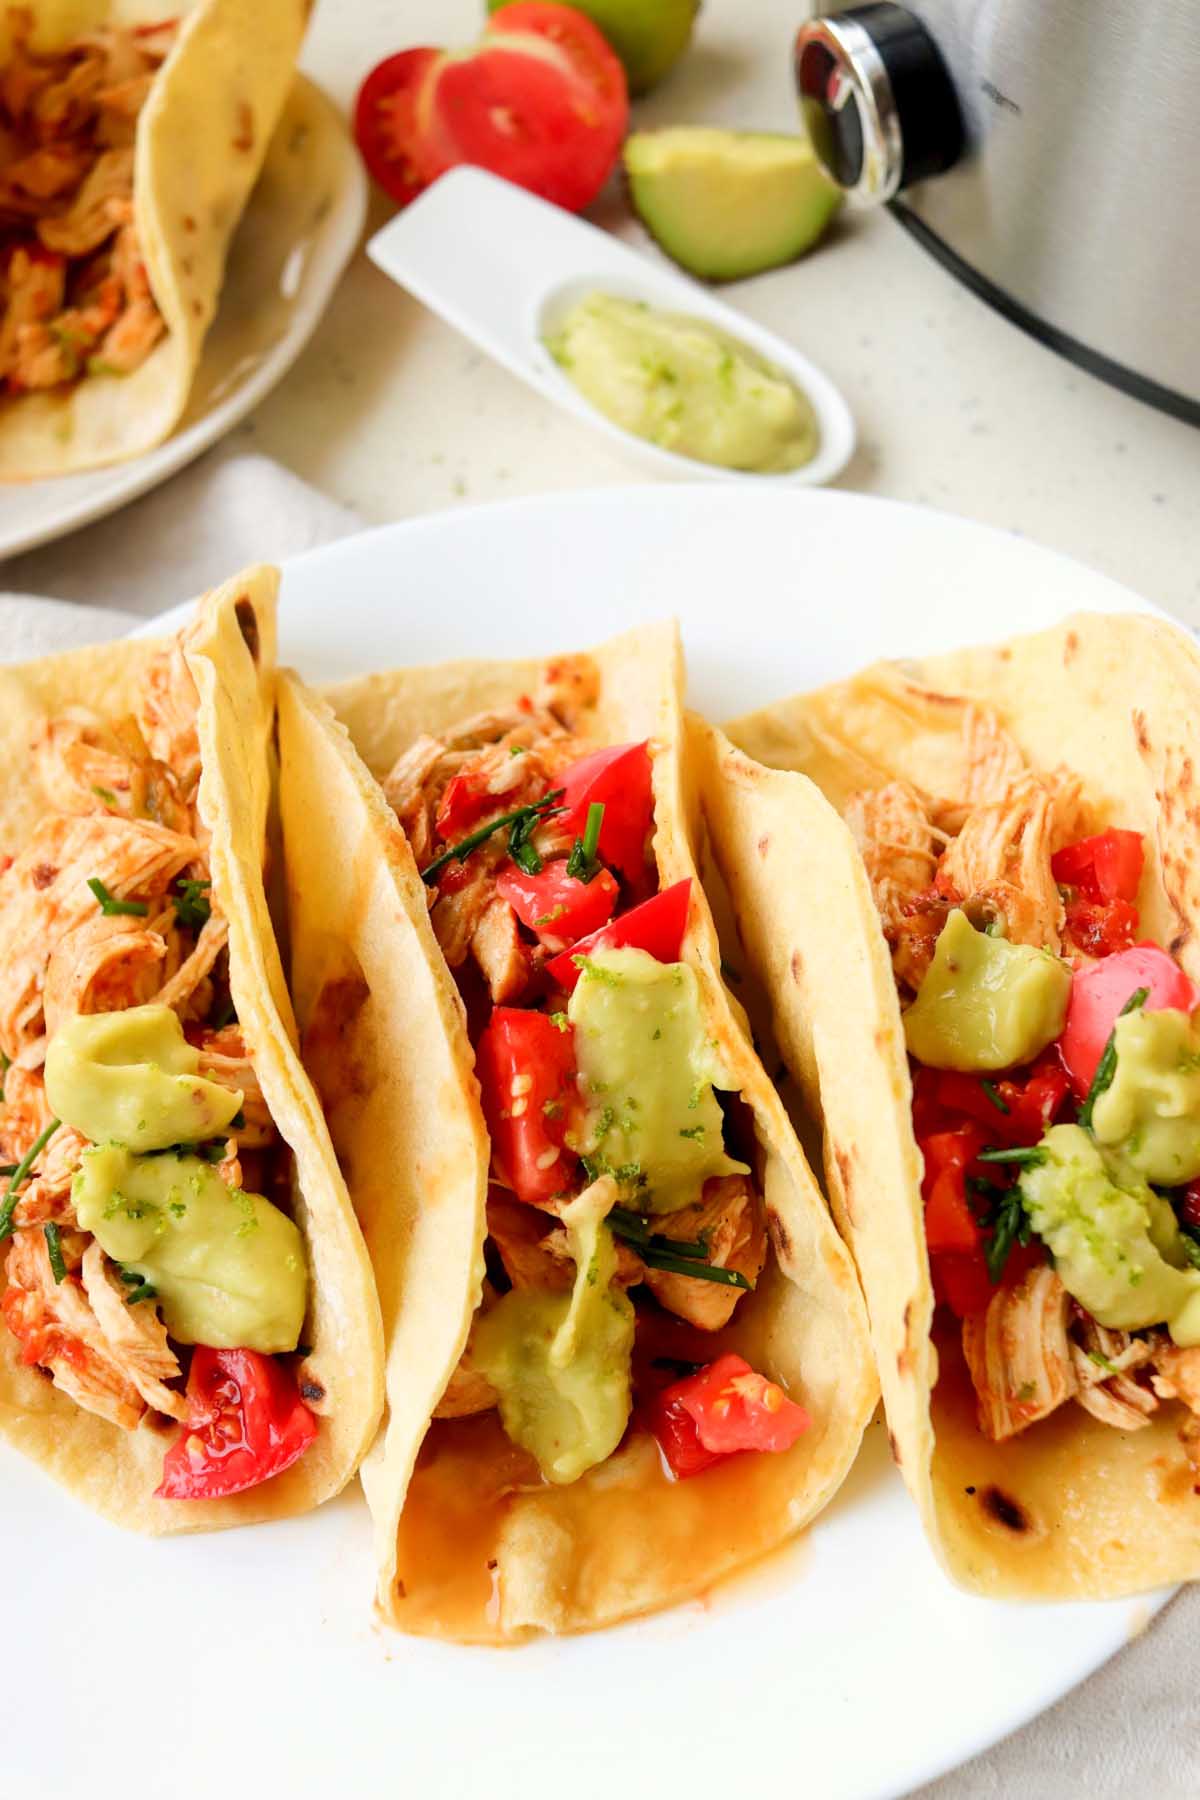 chicken tacos topped with avocado sauce.